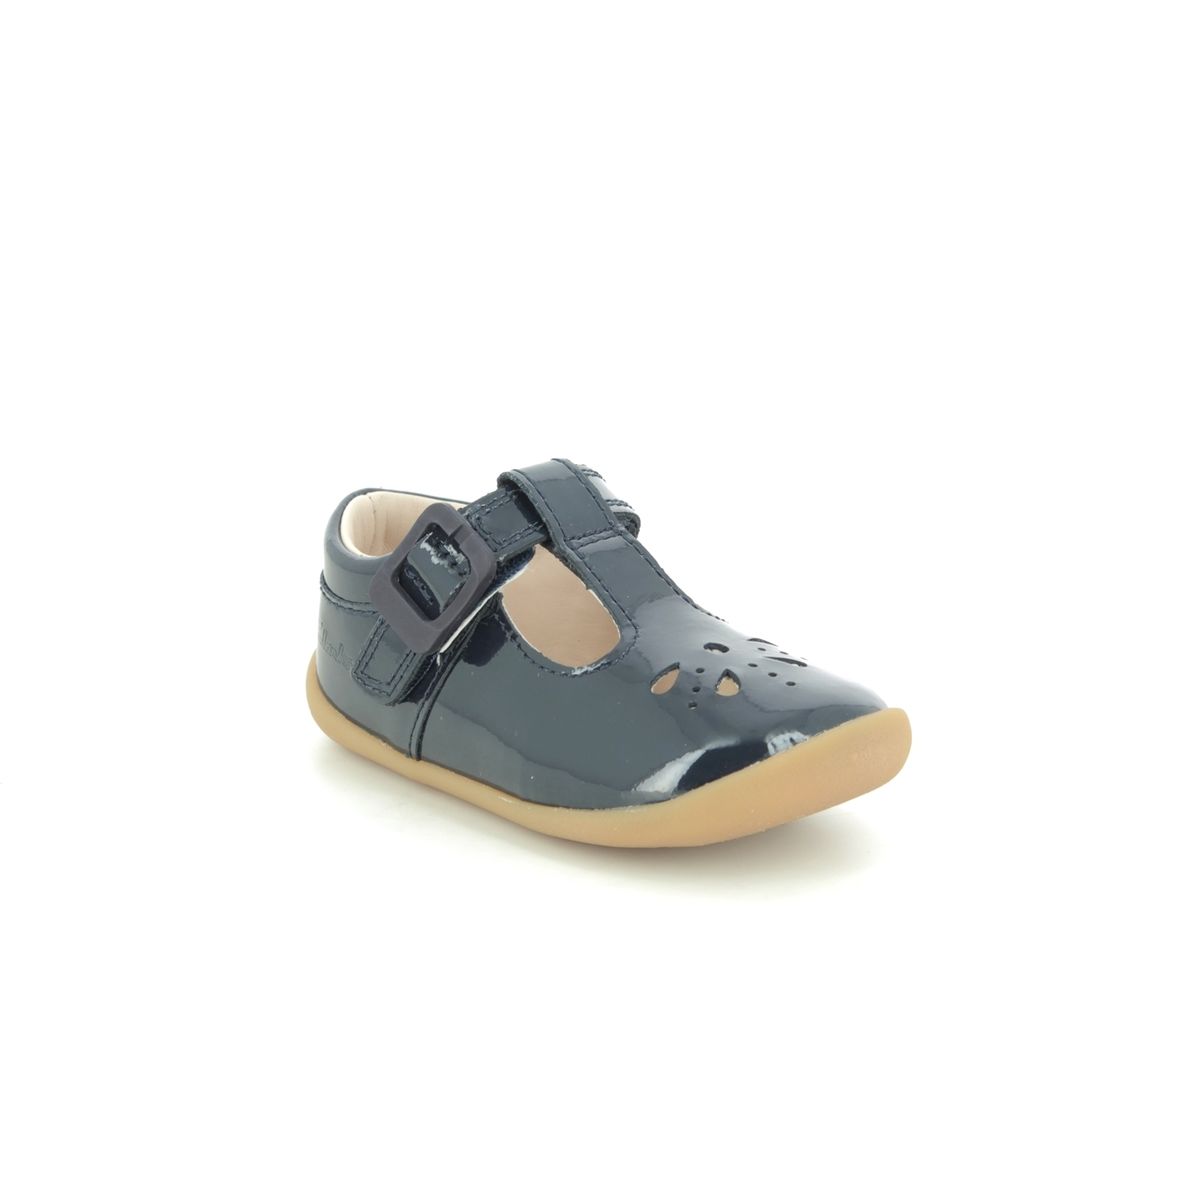 Clarks Roamer Star T G Fit patent first and baby shoes